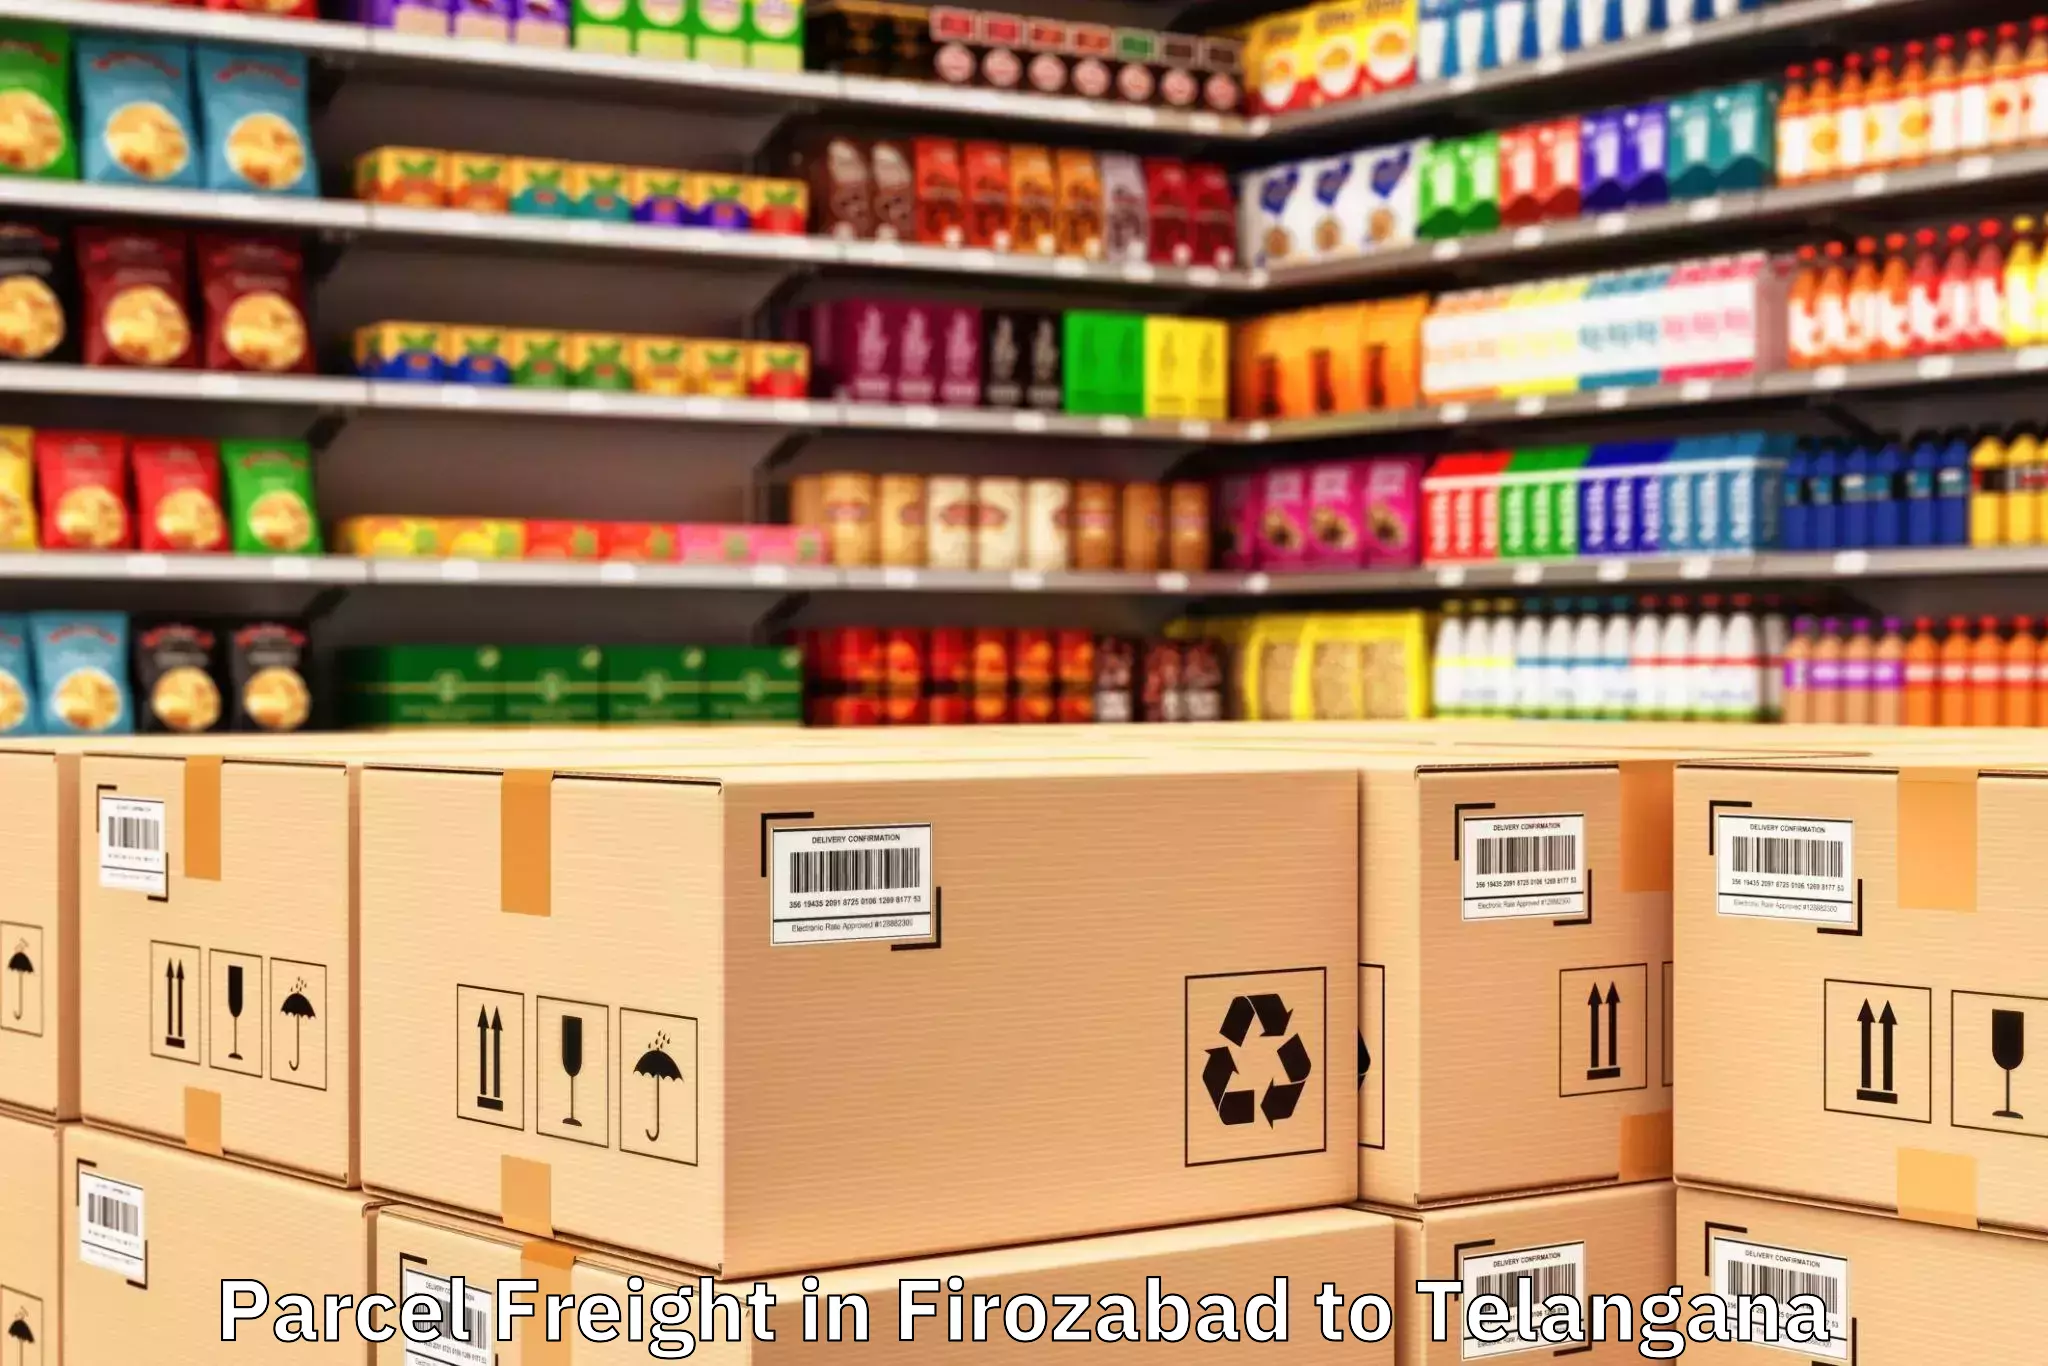 Affordable Firozabad to M Turkapalle Parcel Freight